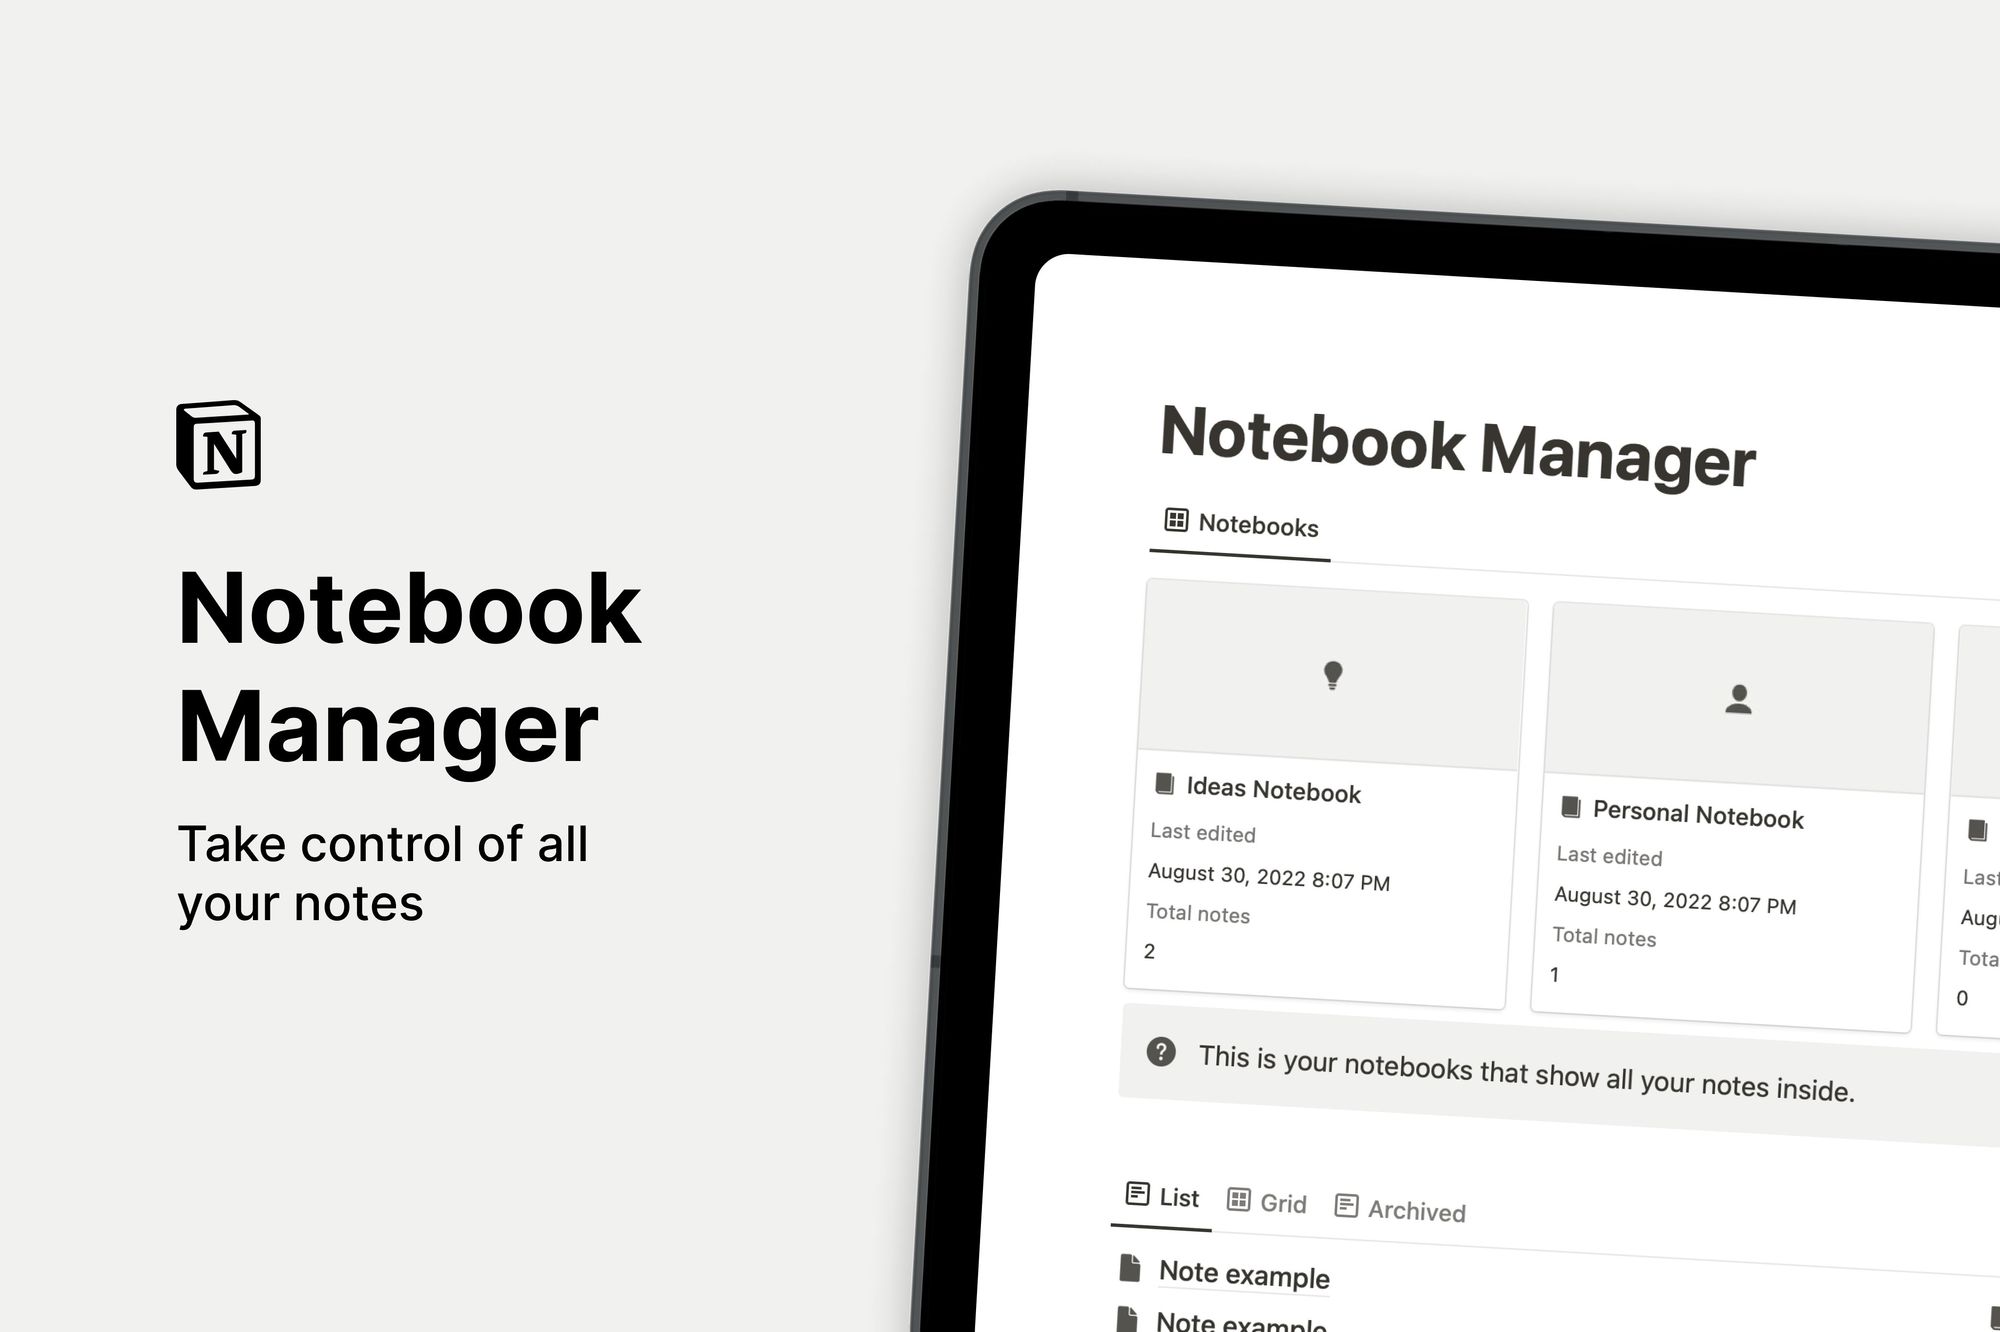 Notebook Manager